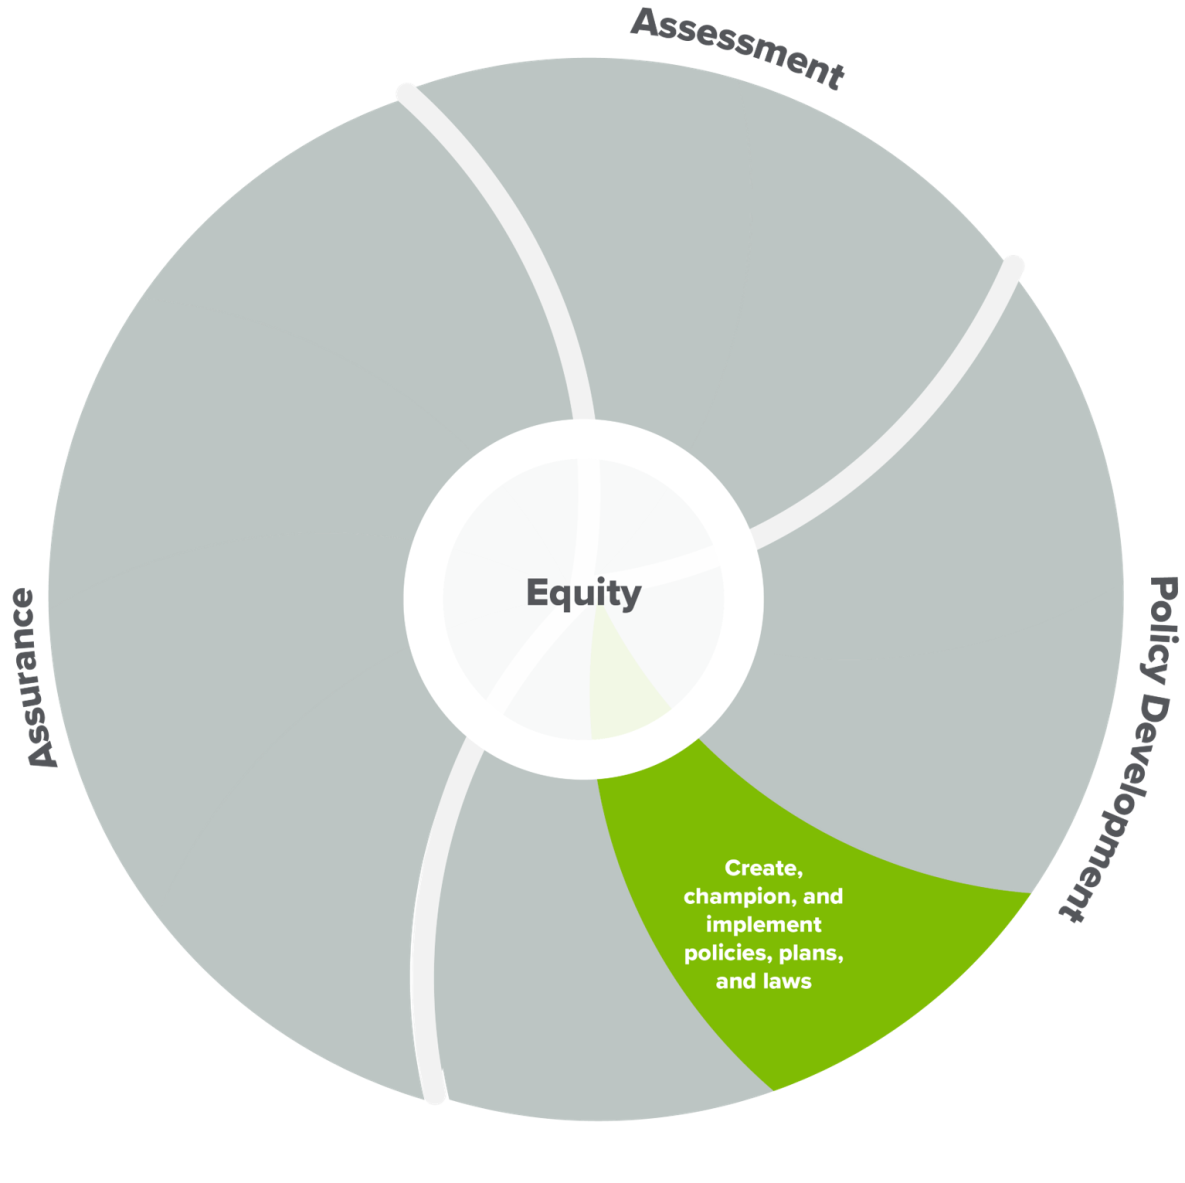 Public health wheel showing essential service 5 in dark color, with equity at the center.